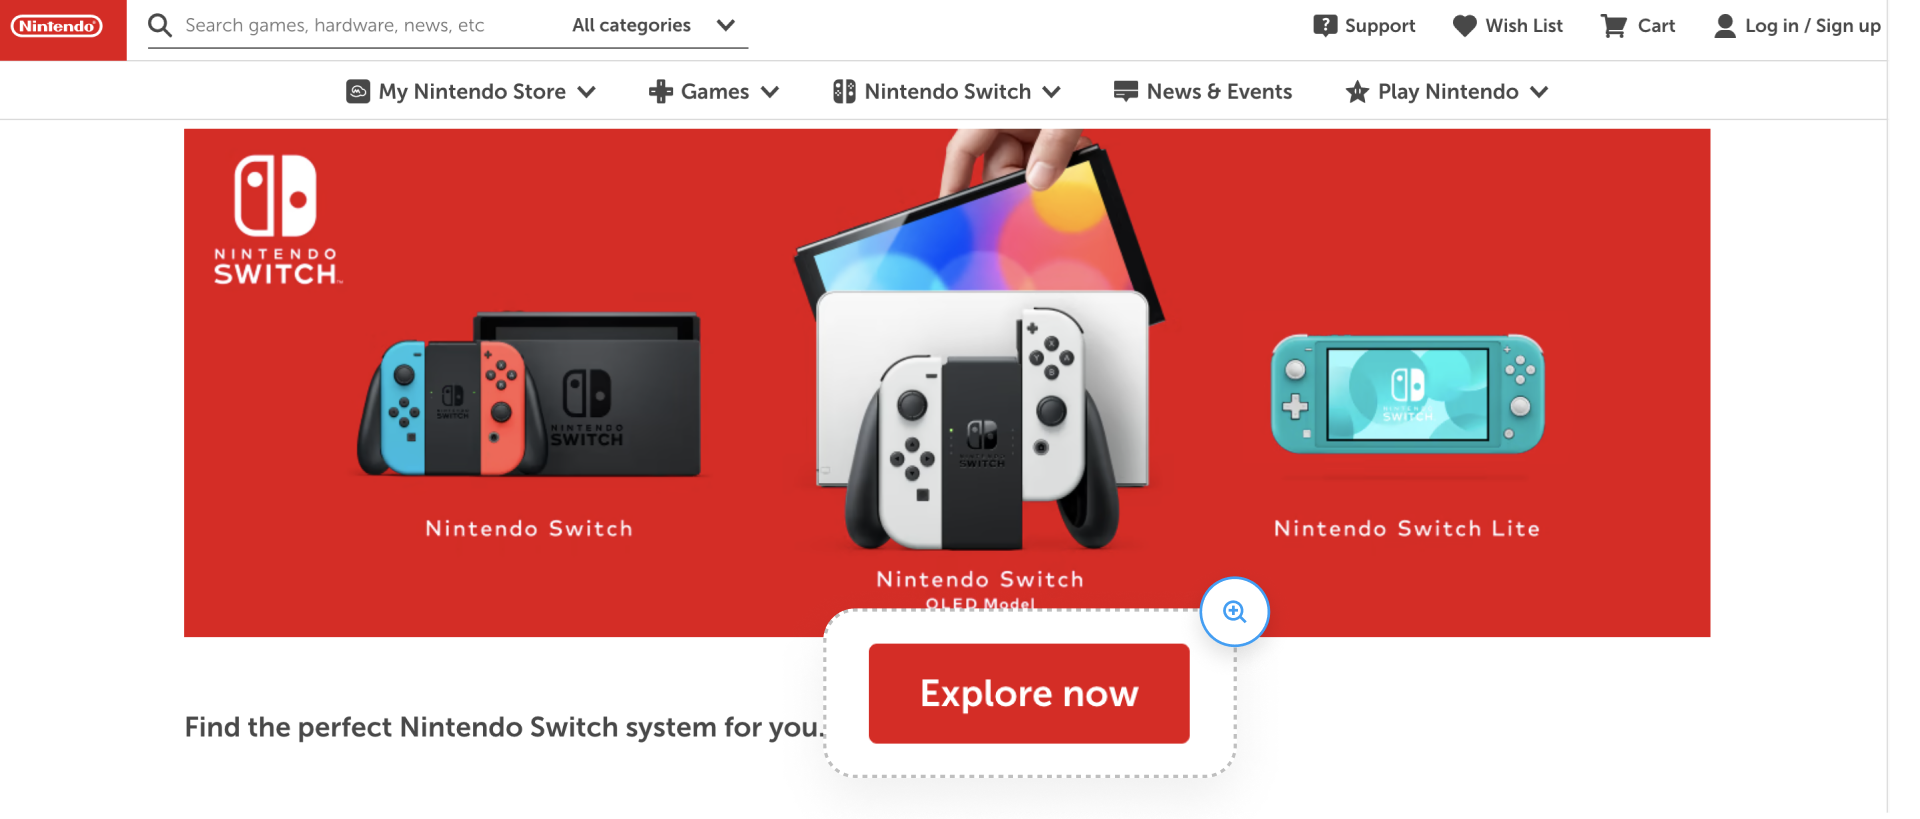 Nintendo Switch landing page screenshot with red Explore now call-to-action button